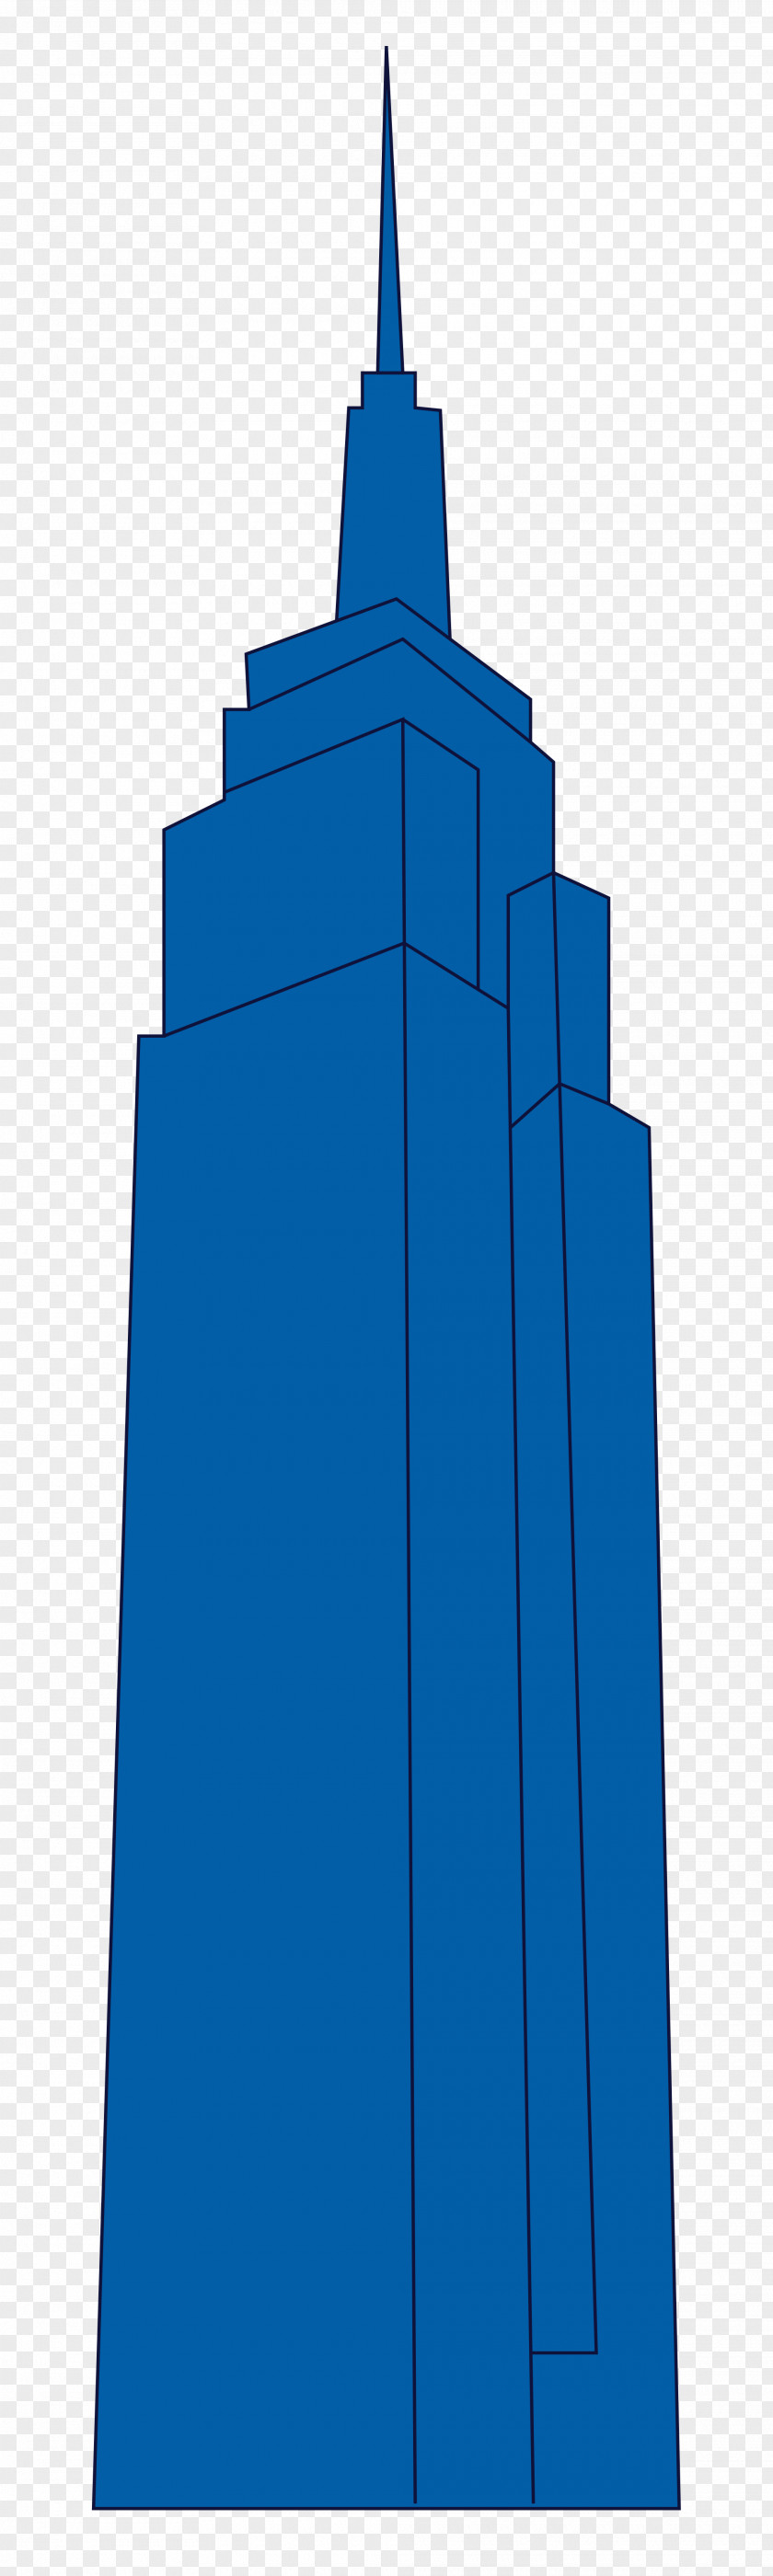 Building Empire State PNG